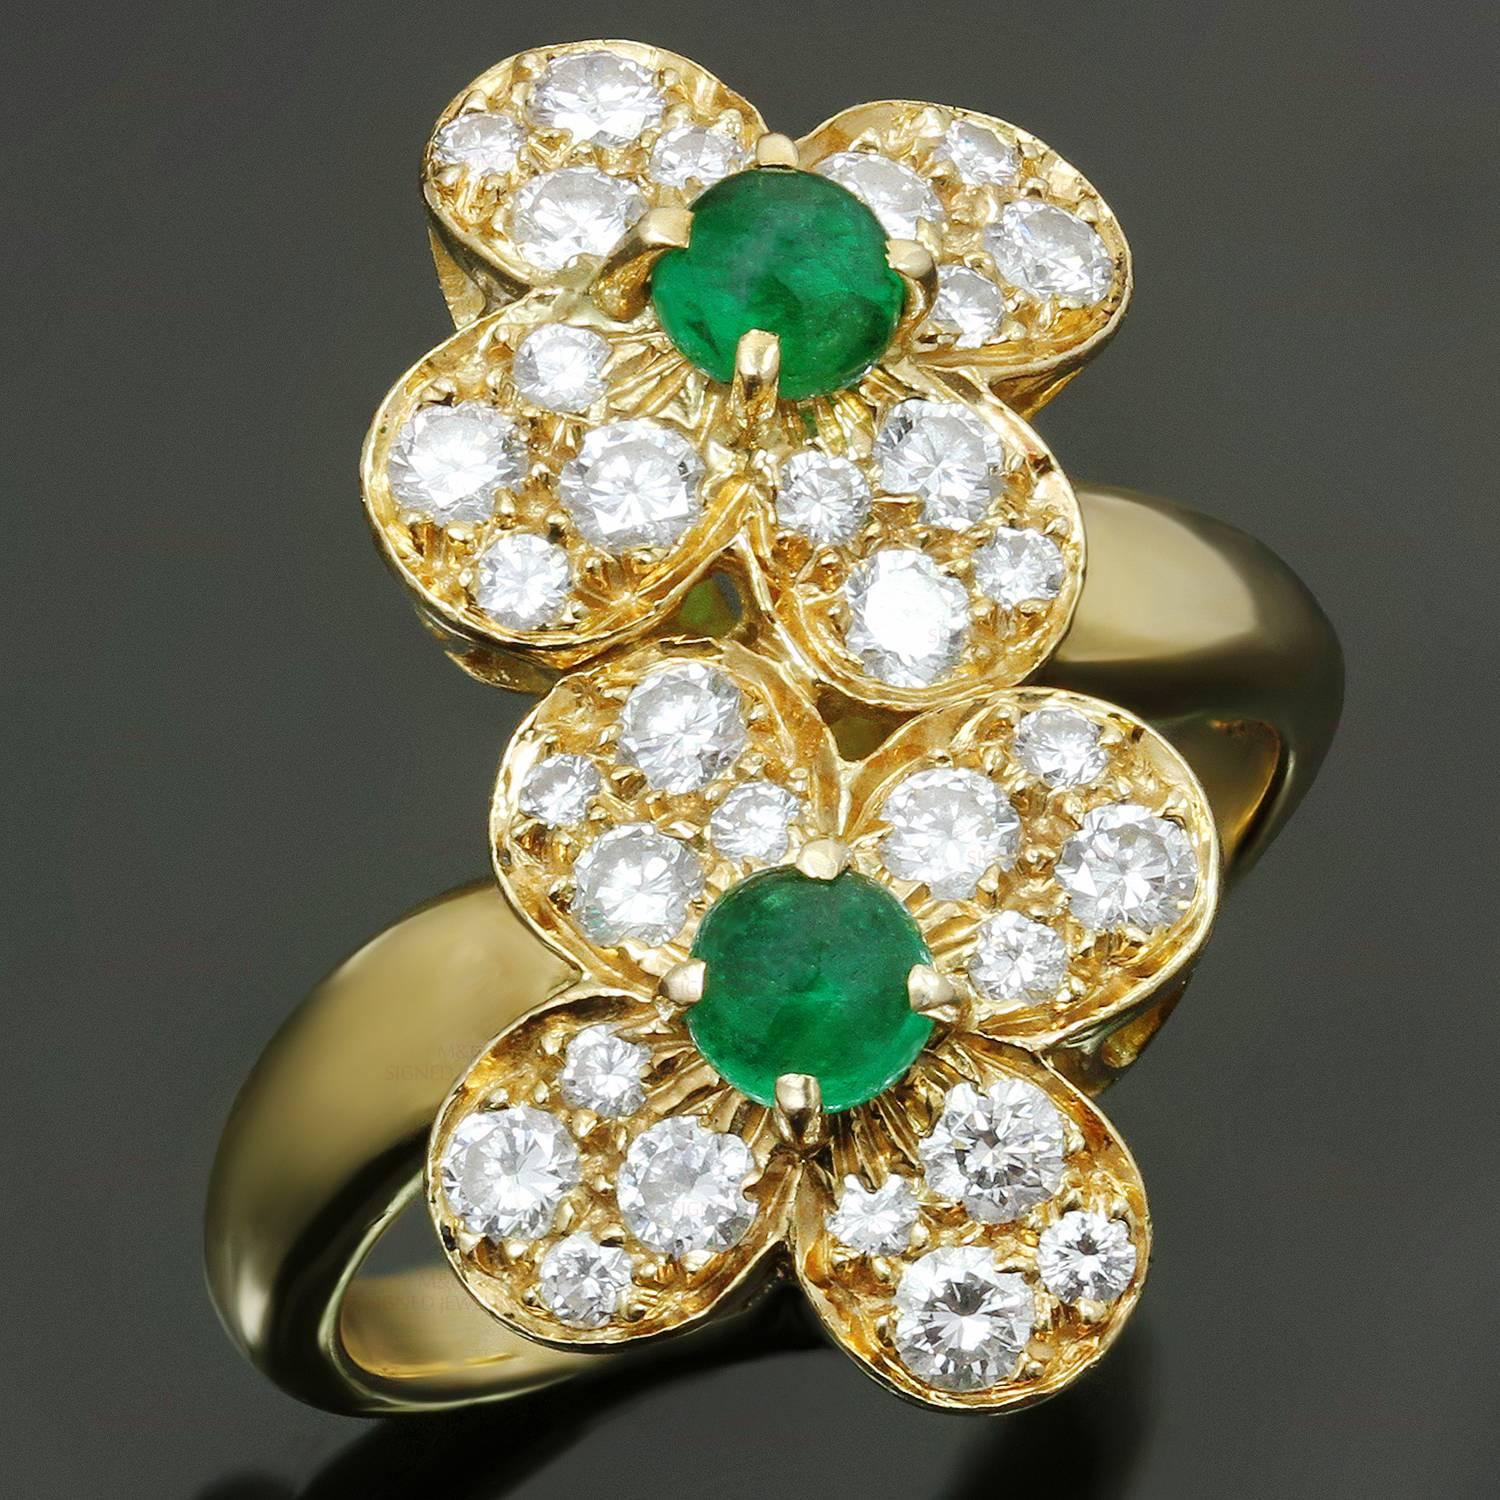 This stunning Van Cleefs & Arpels ring from the classic Trefle collection is crafted in 18k yellow gold and features a double clover flower motif set with round cabochon emeralds and brilliant-cut round diamonds of an estimated 0.65 carats. Made